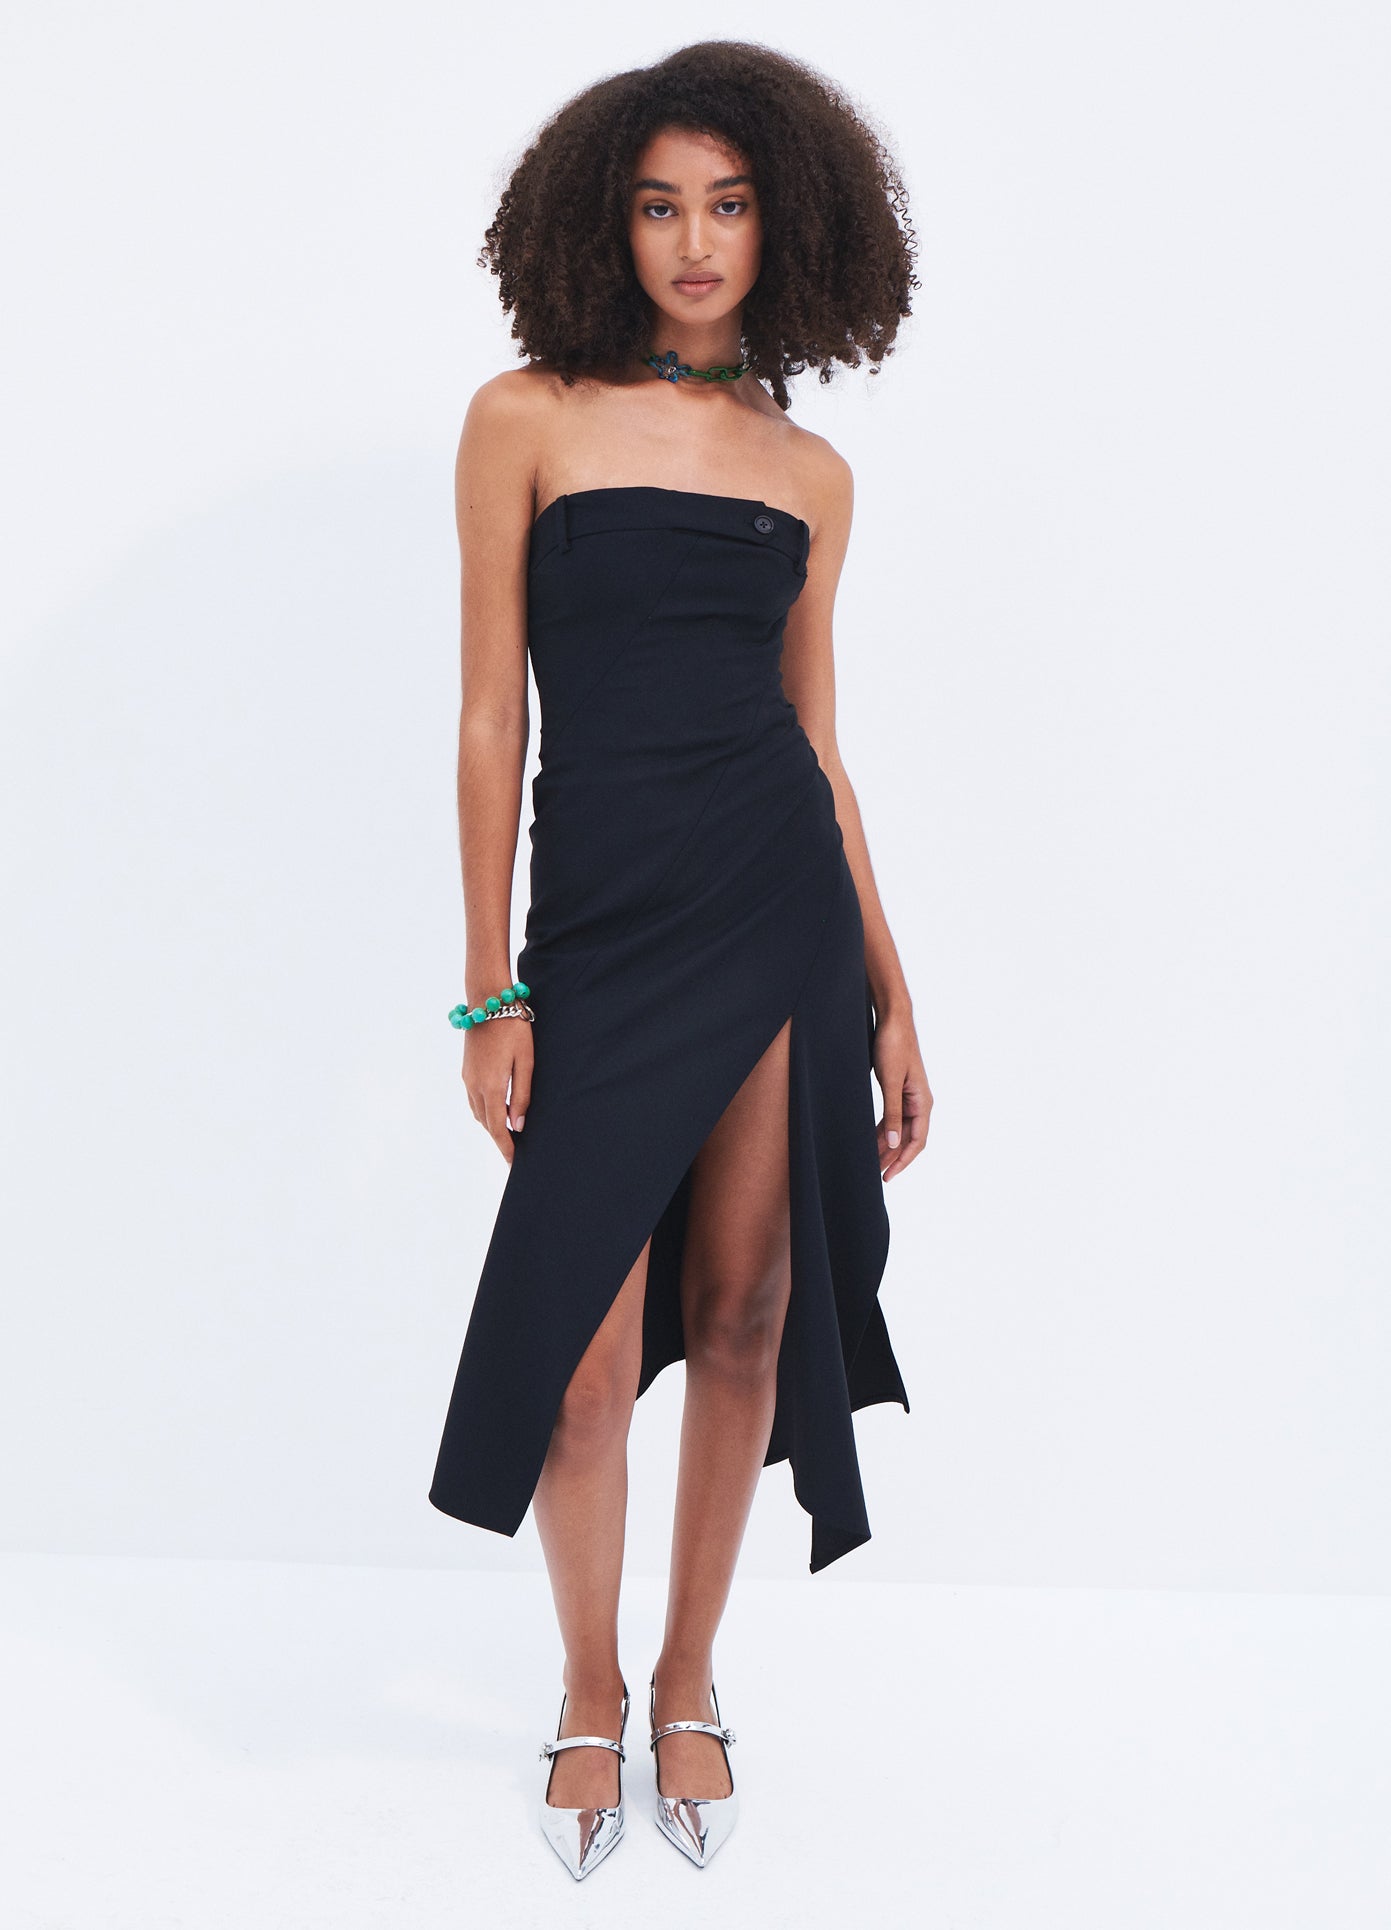 MONSE Twisted Strapless Dress in Black on model full front view